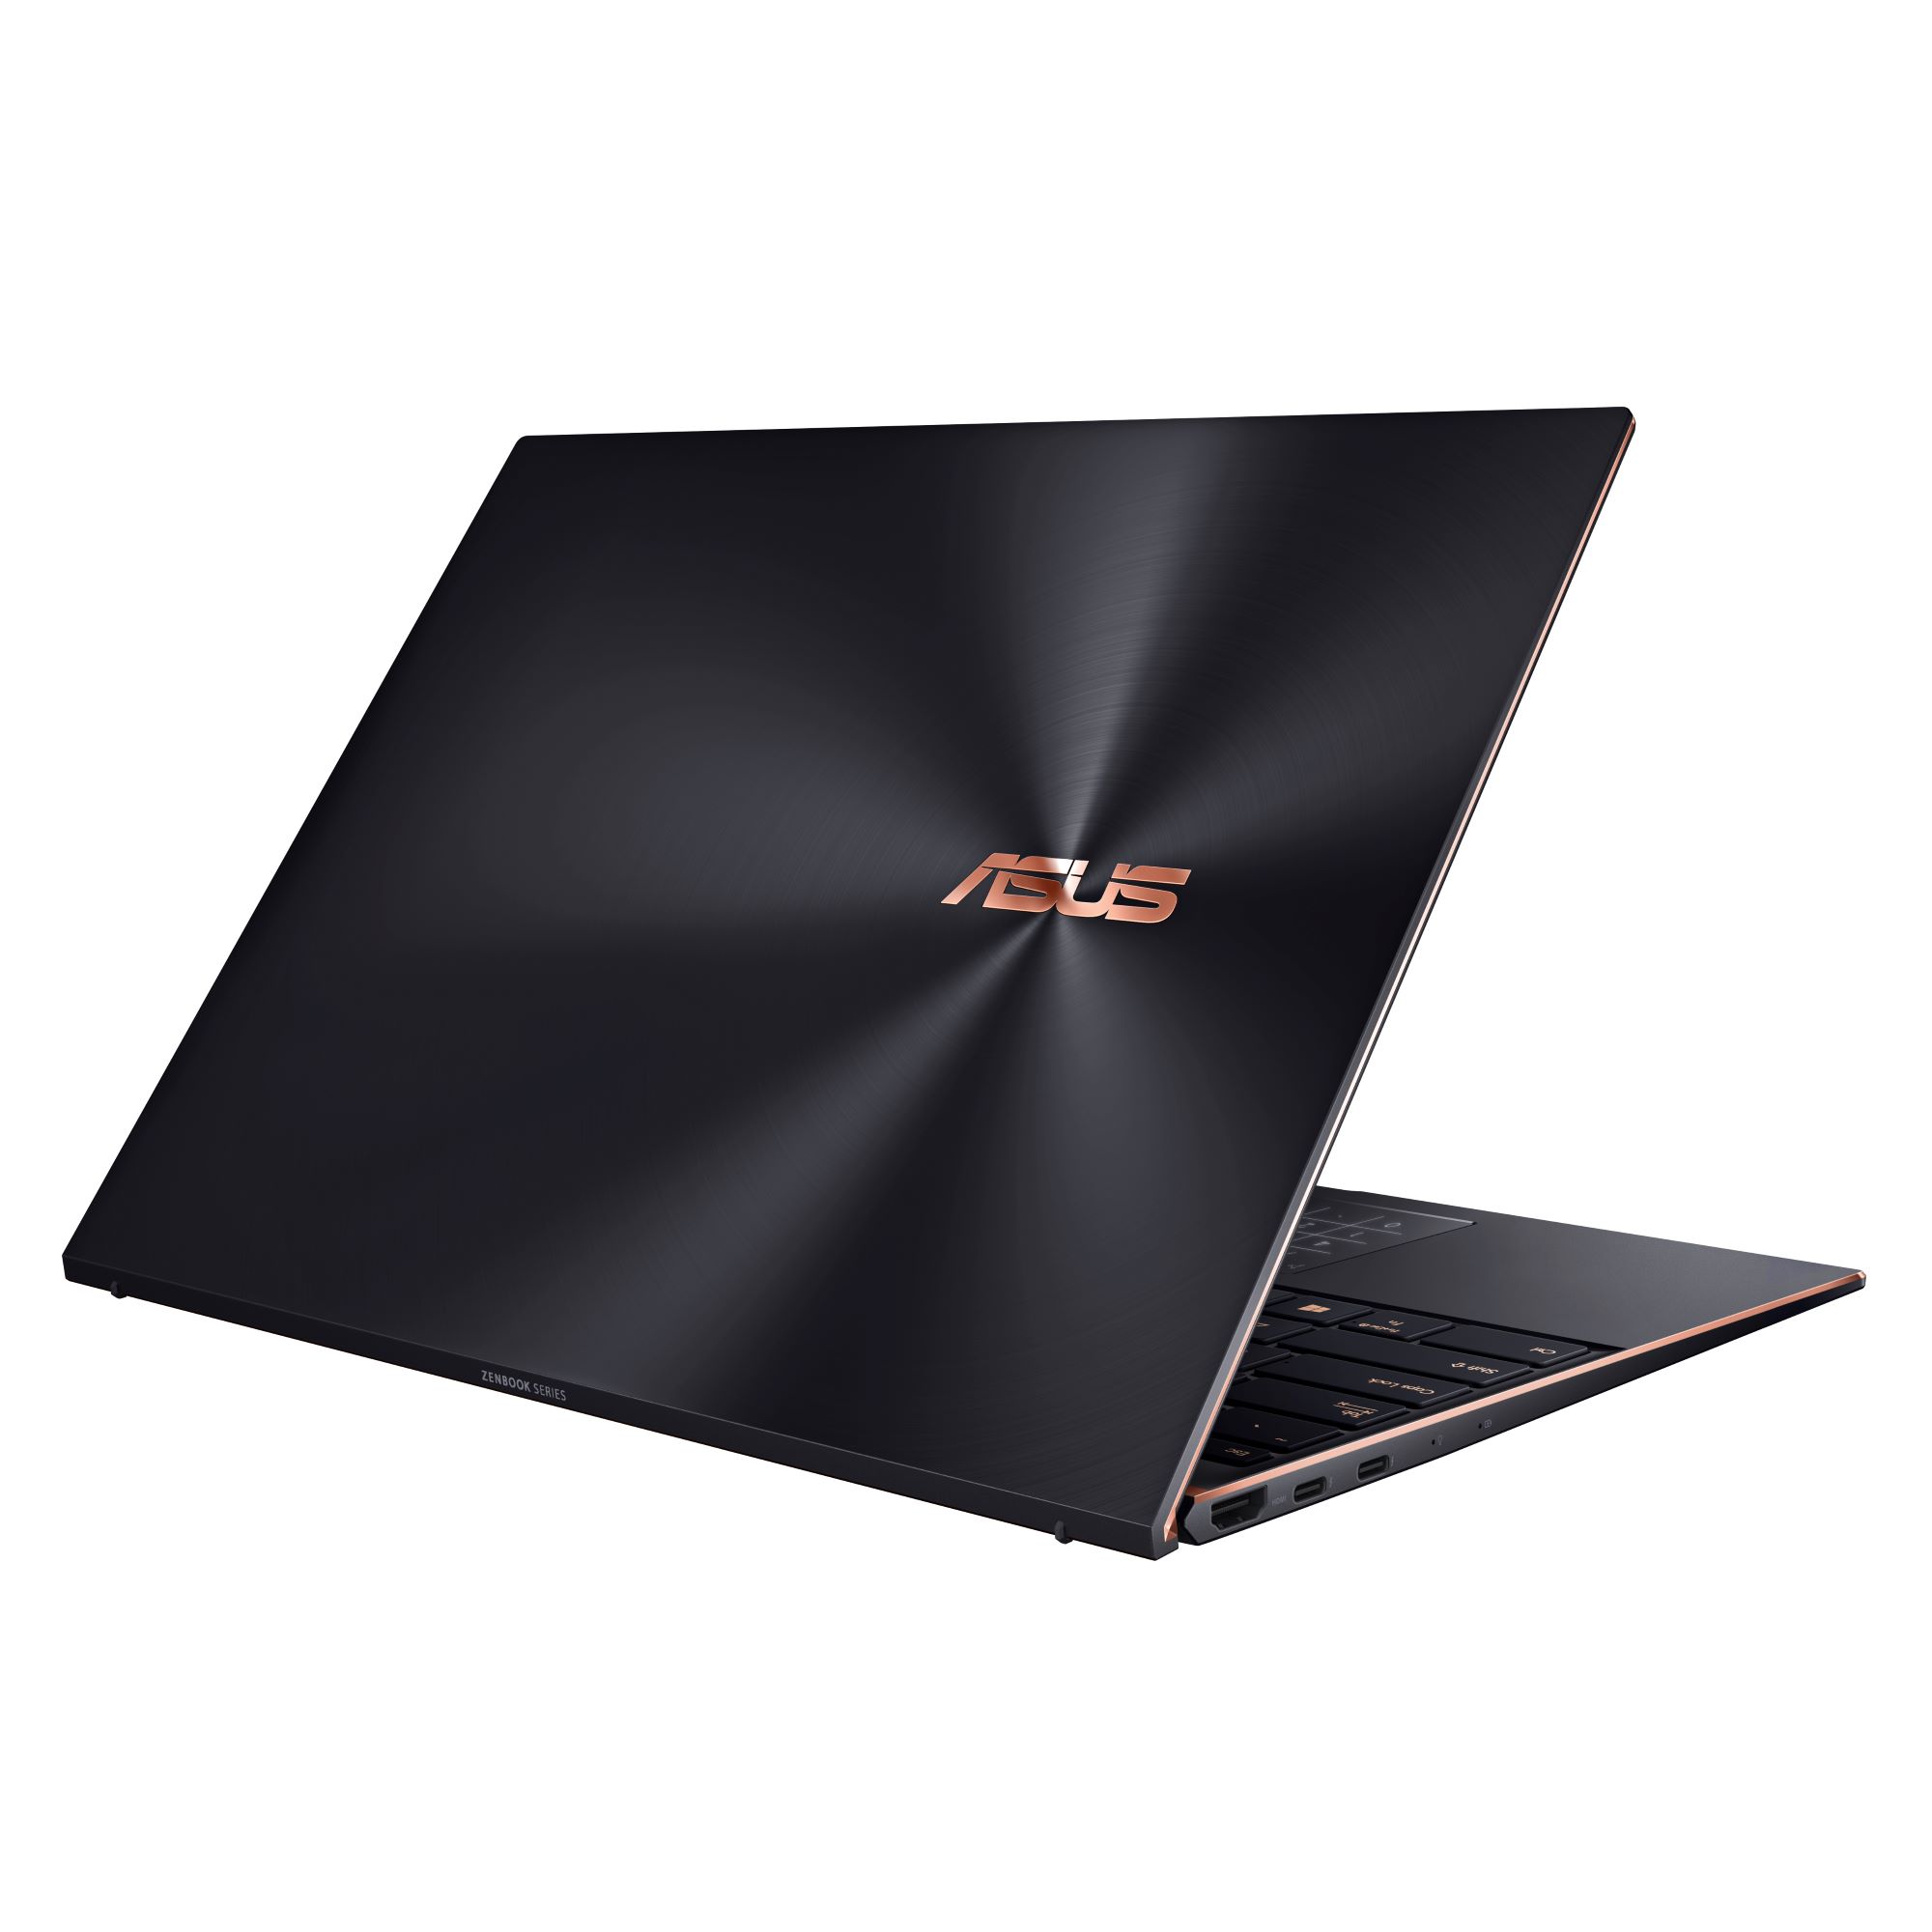 ASUS ZenBook S open but shown from the back